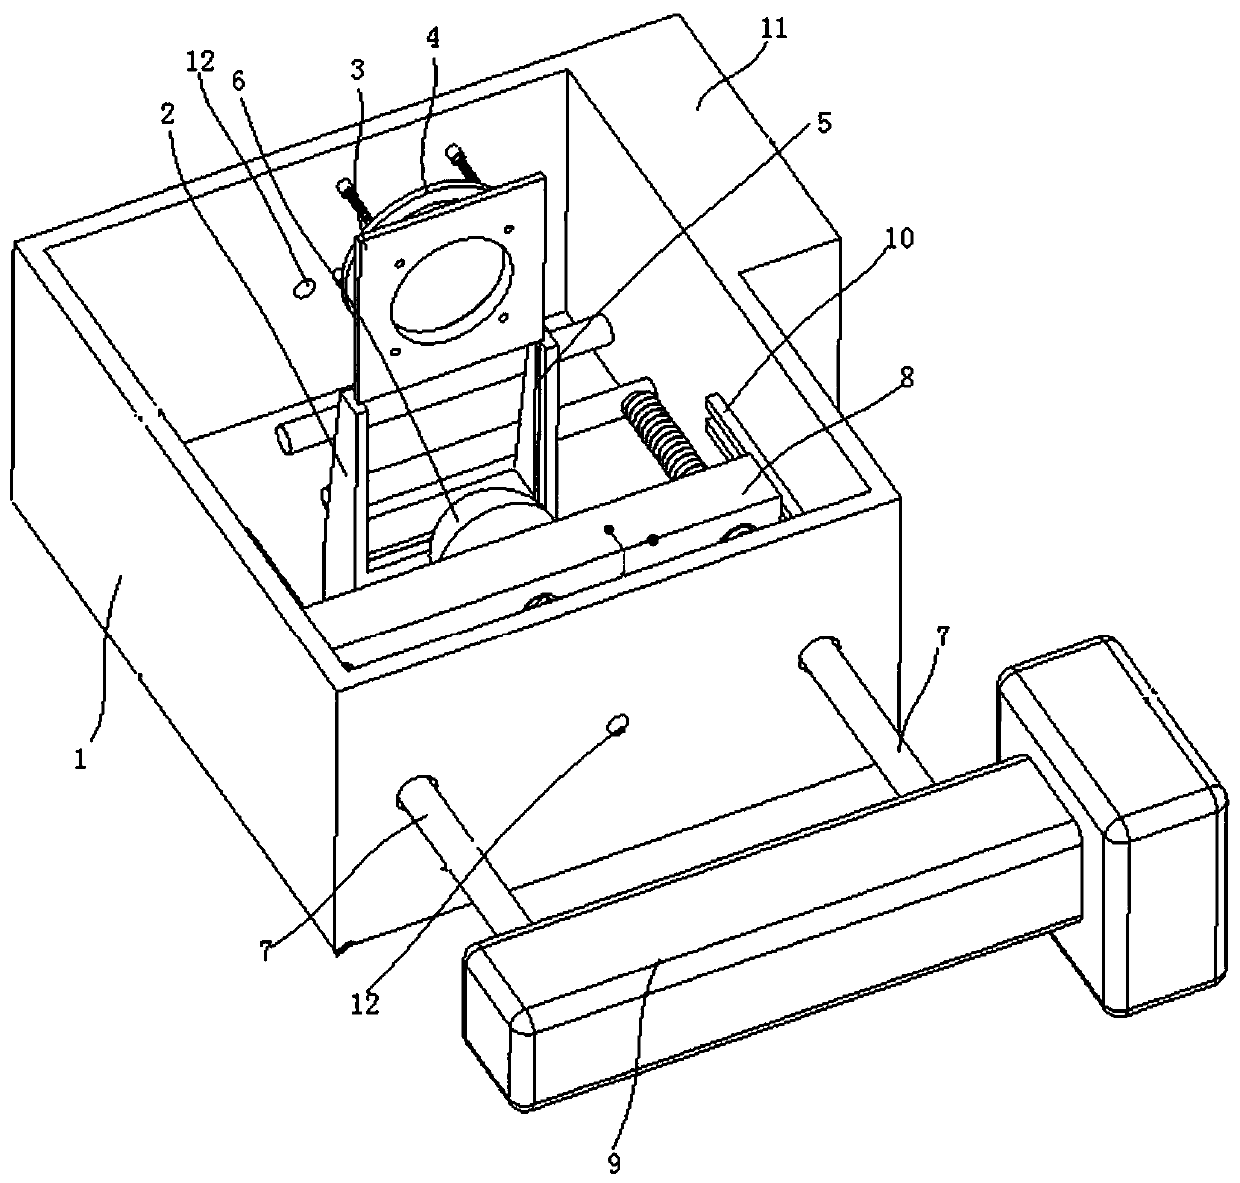 Sample stretching device for in-situ infrared spectroscopic analysis